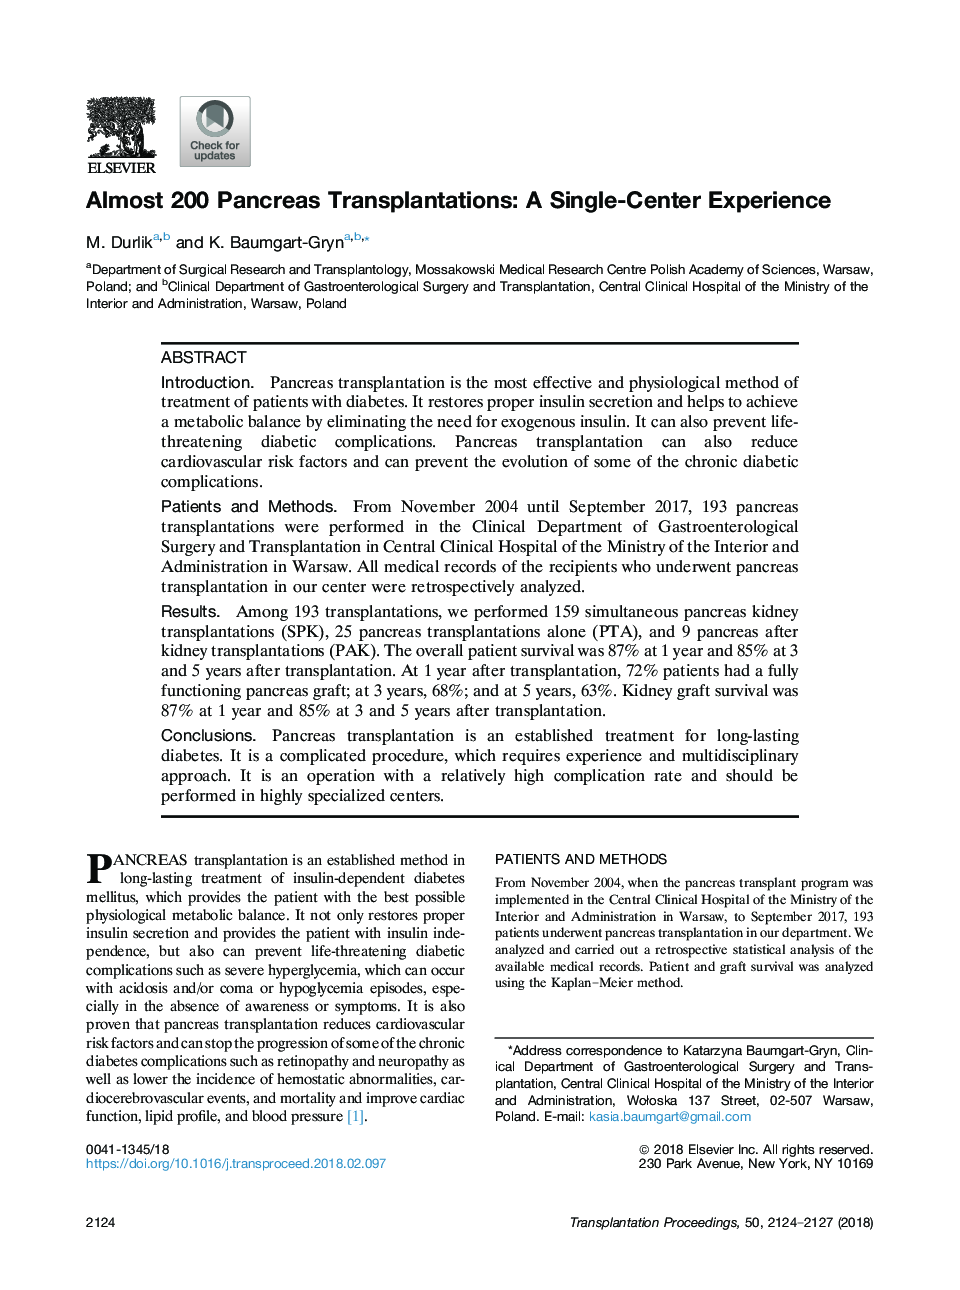 Almost 200 Pancreas Transplantations: A Single-Center Experience